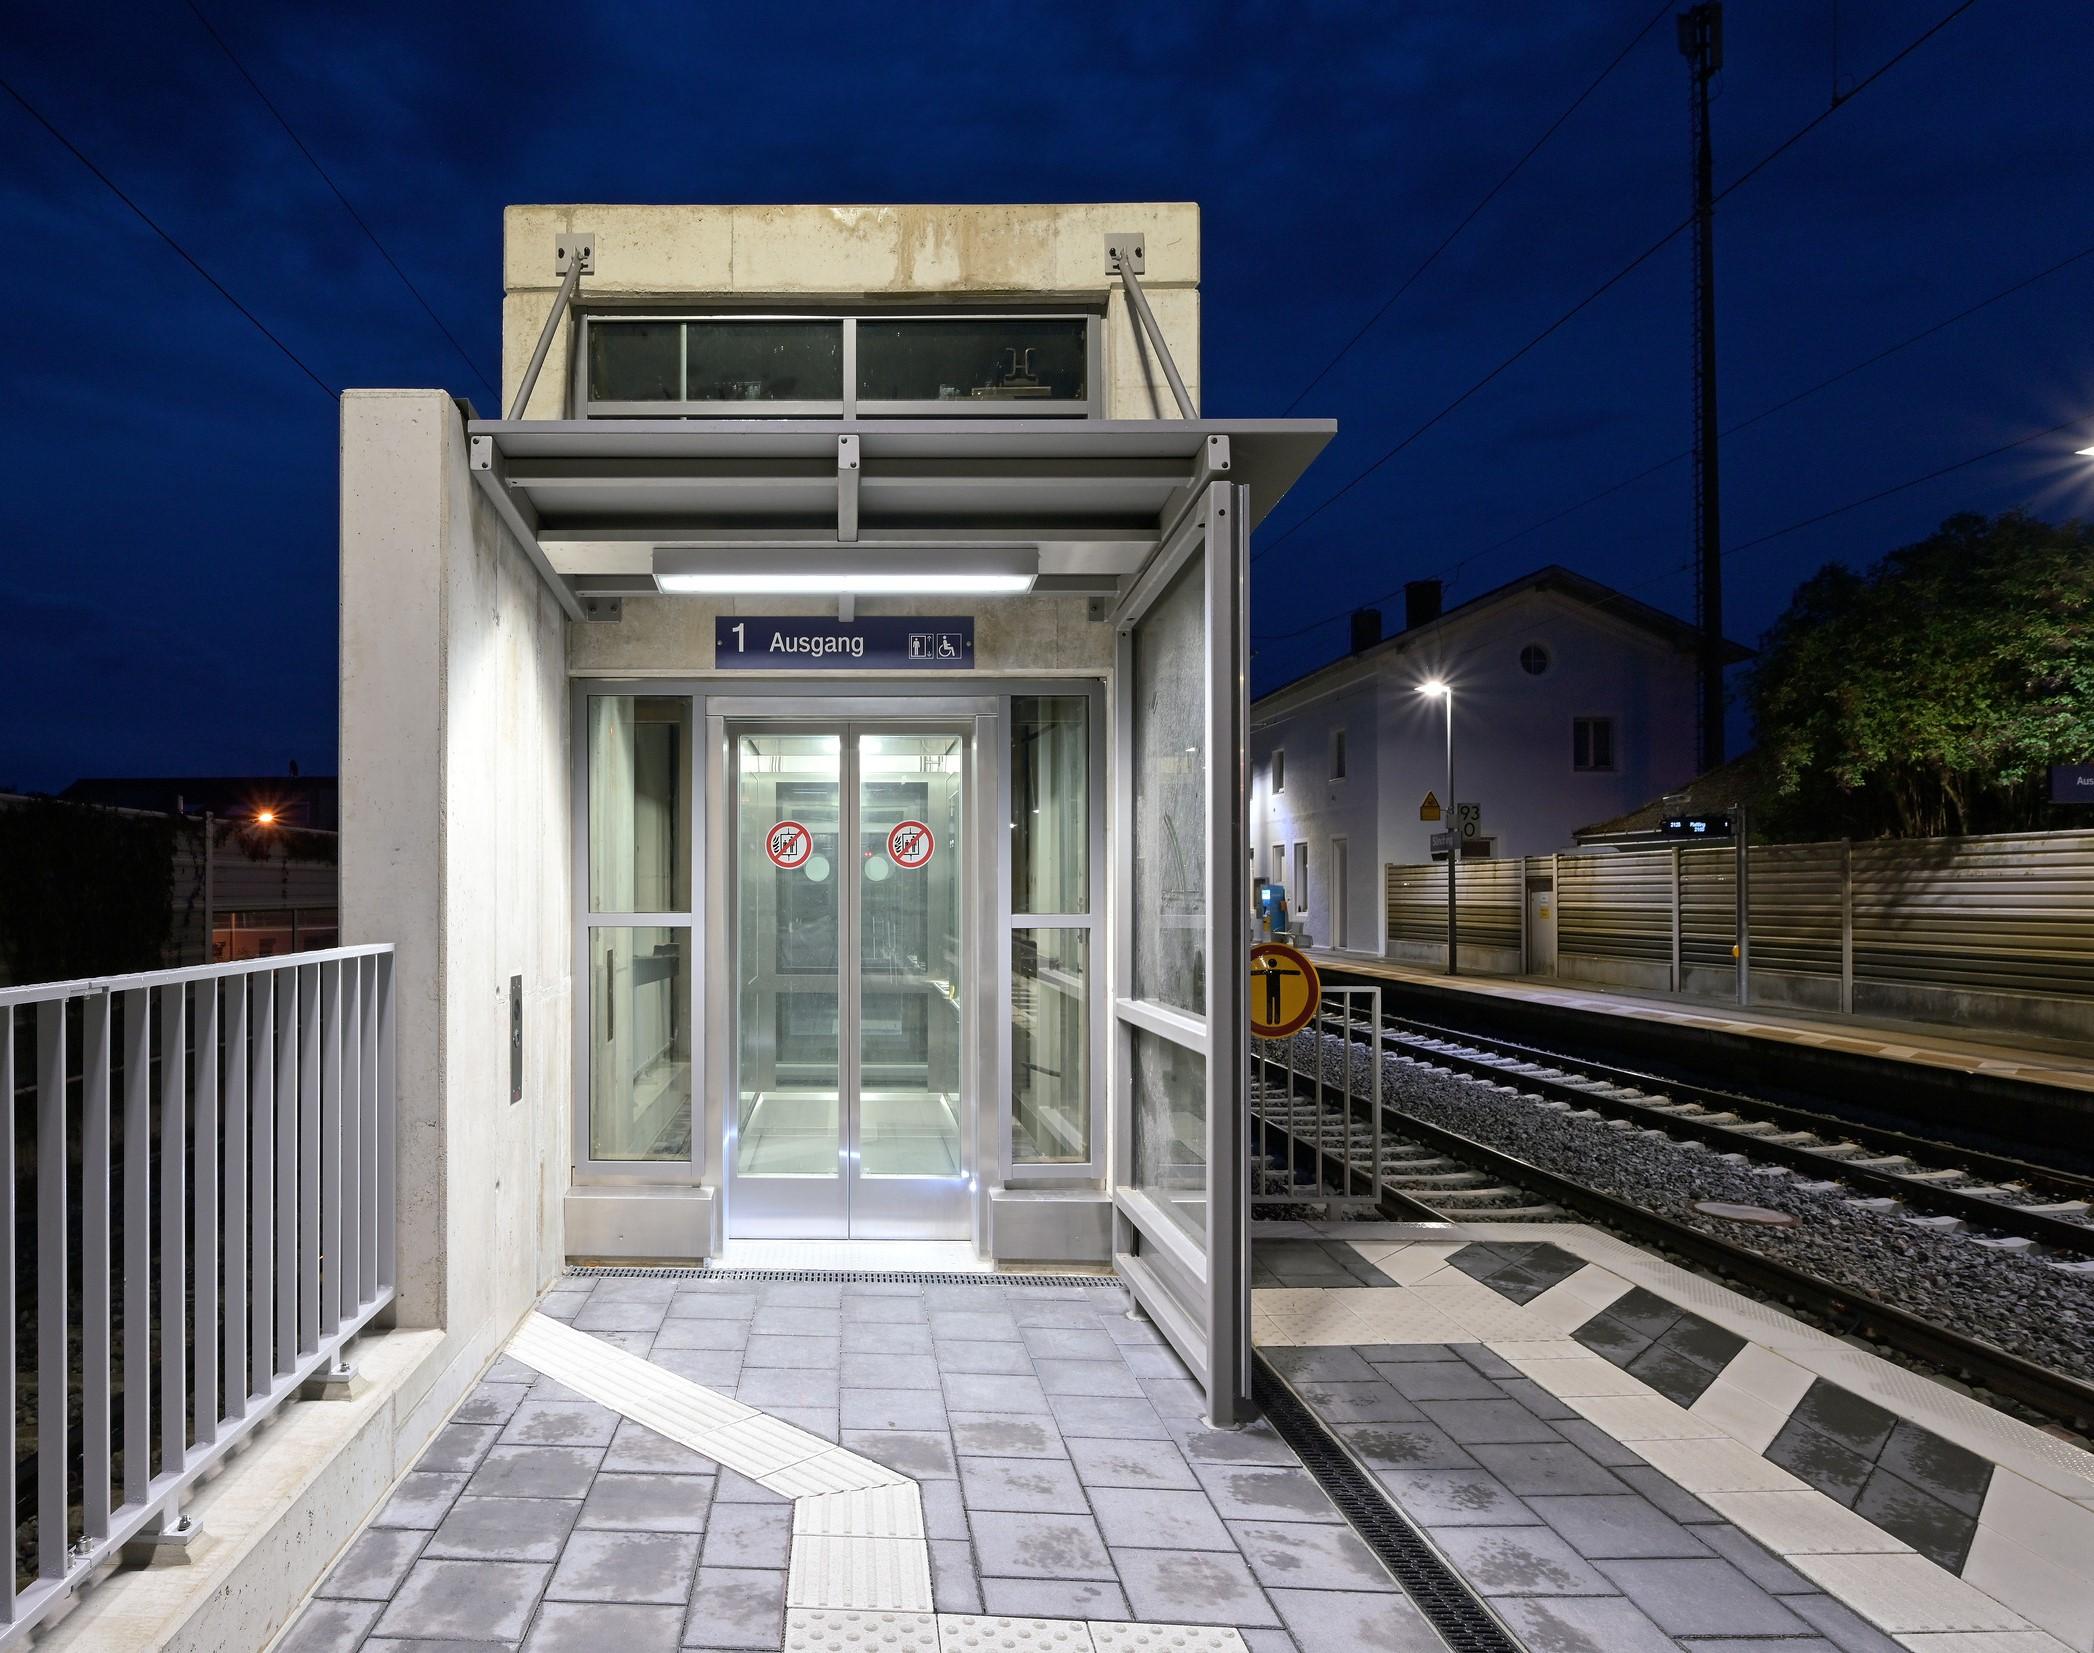 A night-time view of a lift on a platform.